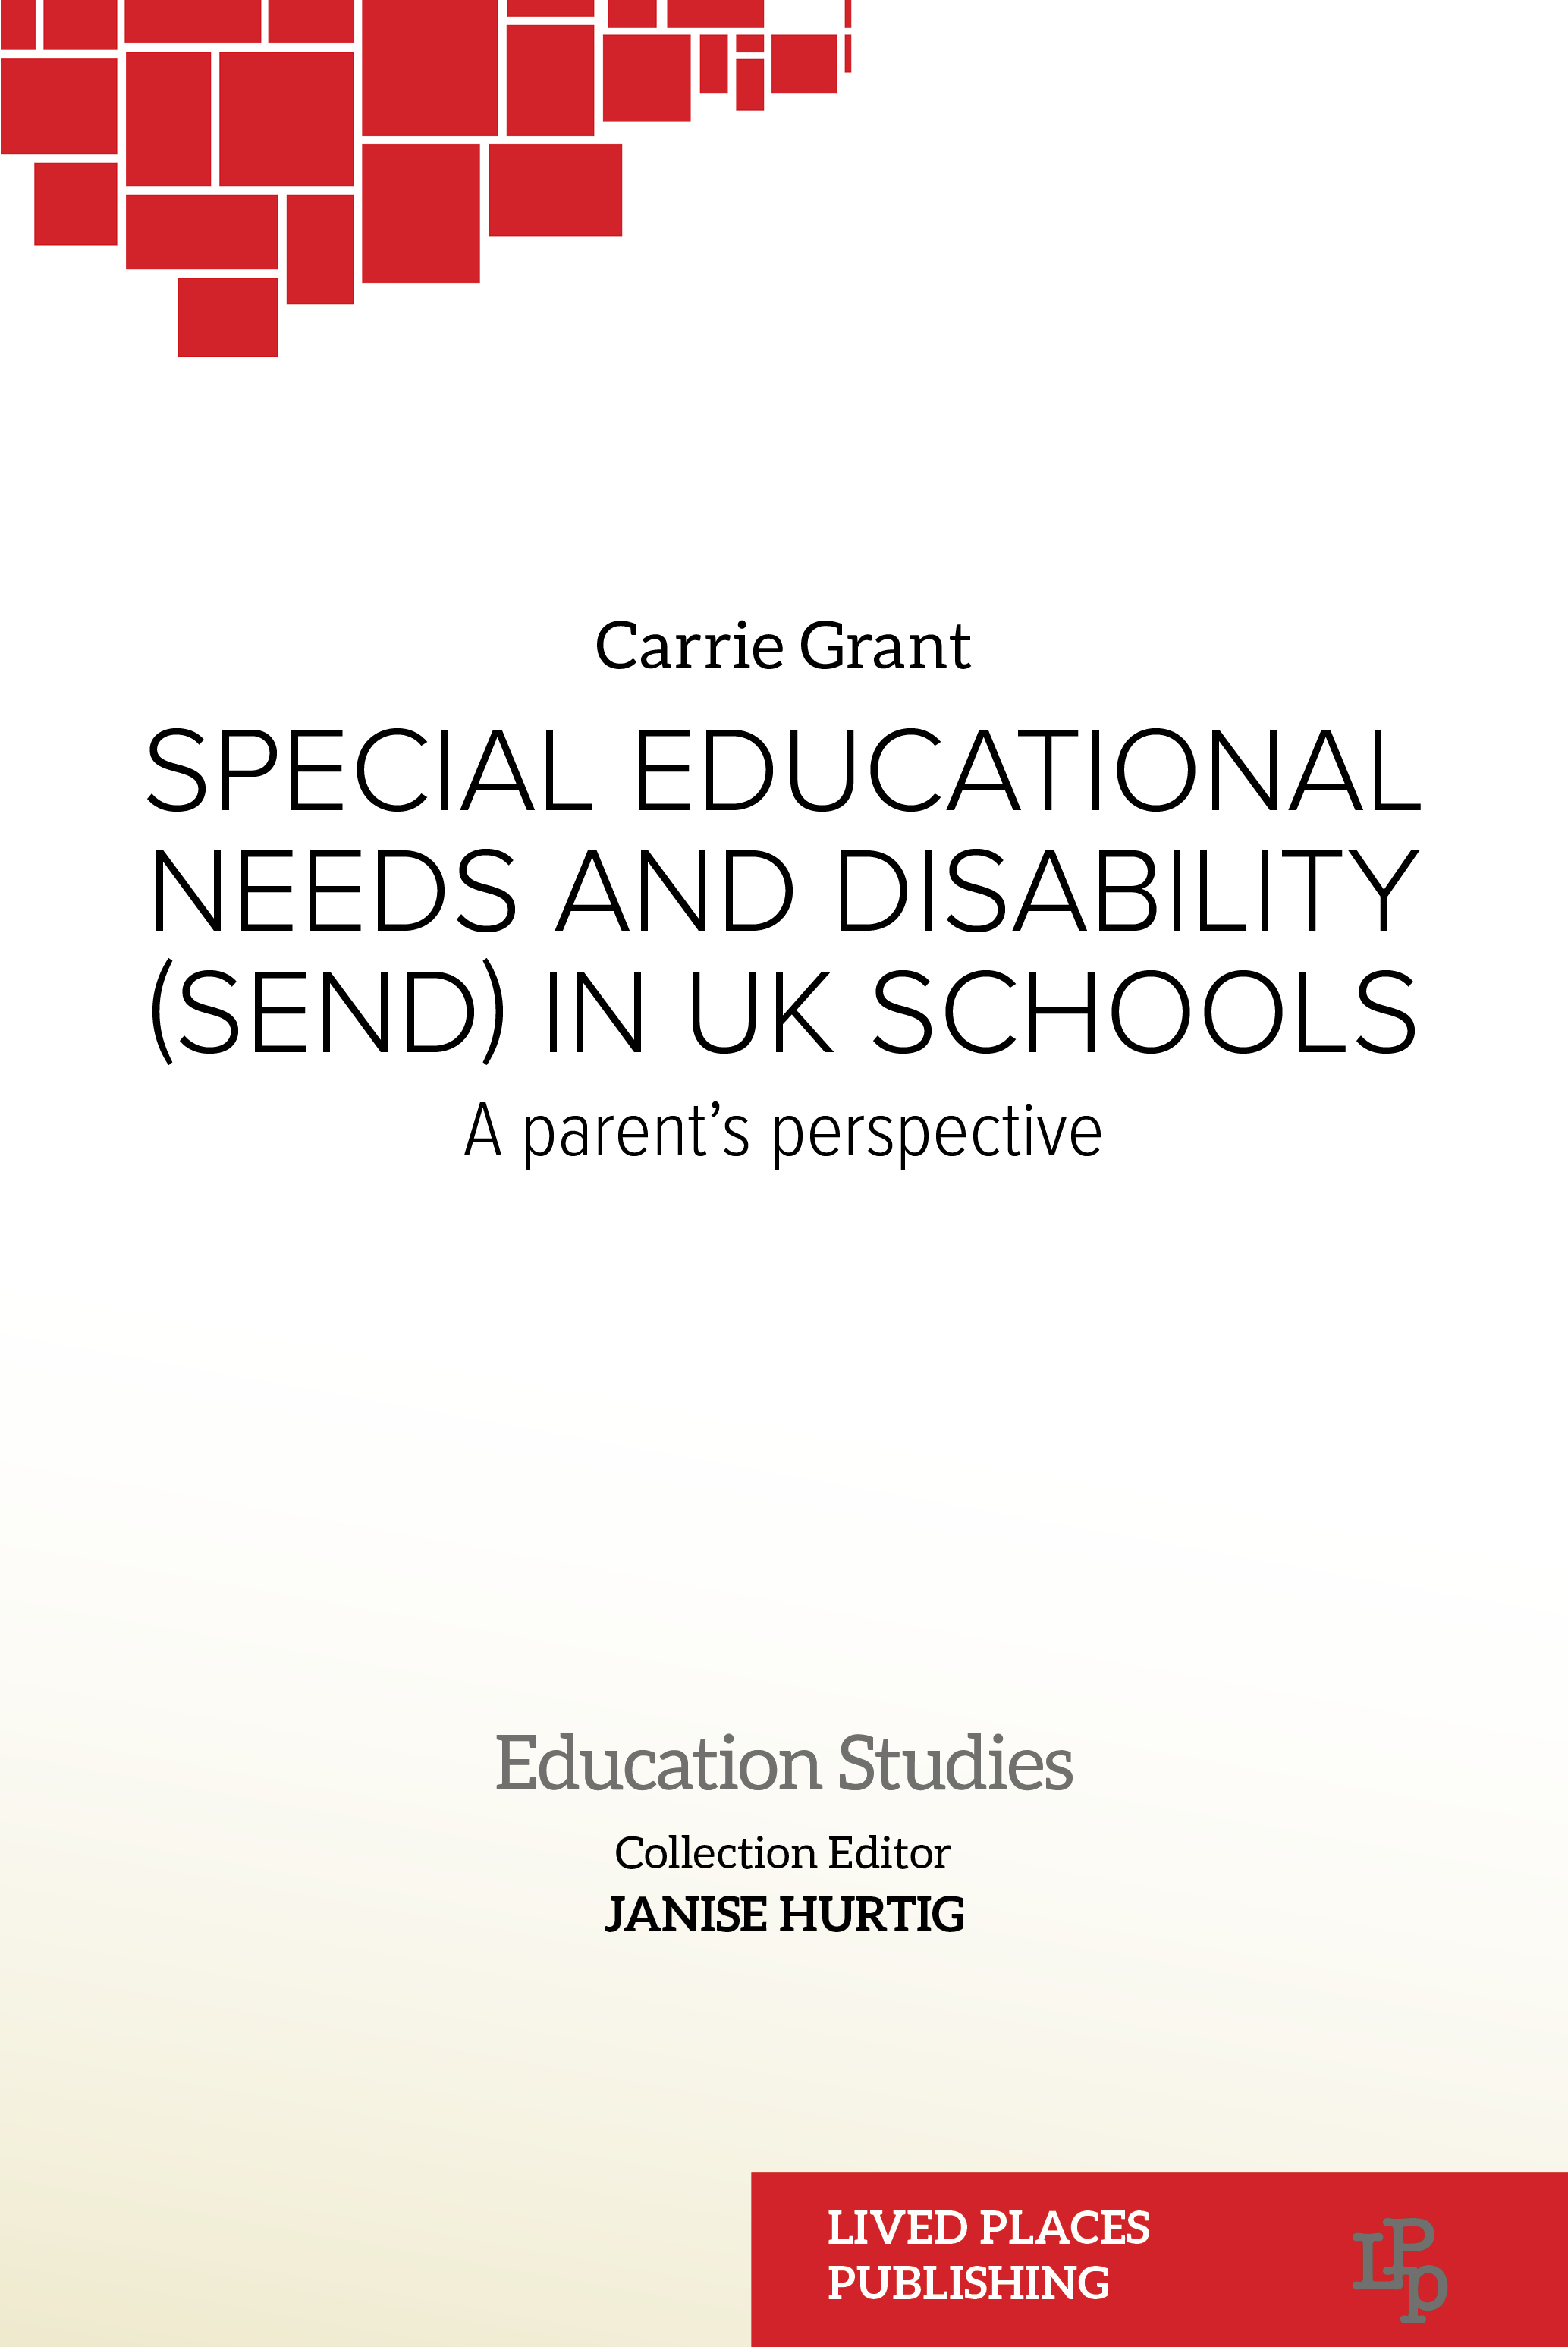 Special Educational Needs and Disabilities in UK Schools: A parent's perspective by Carrie Grant